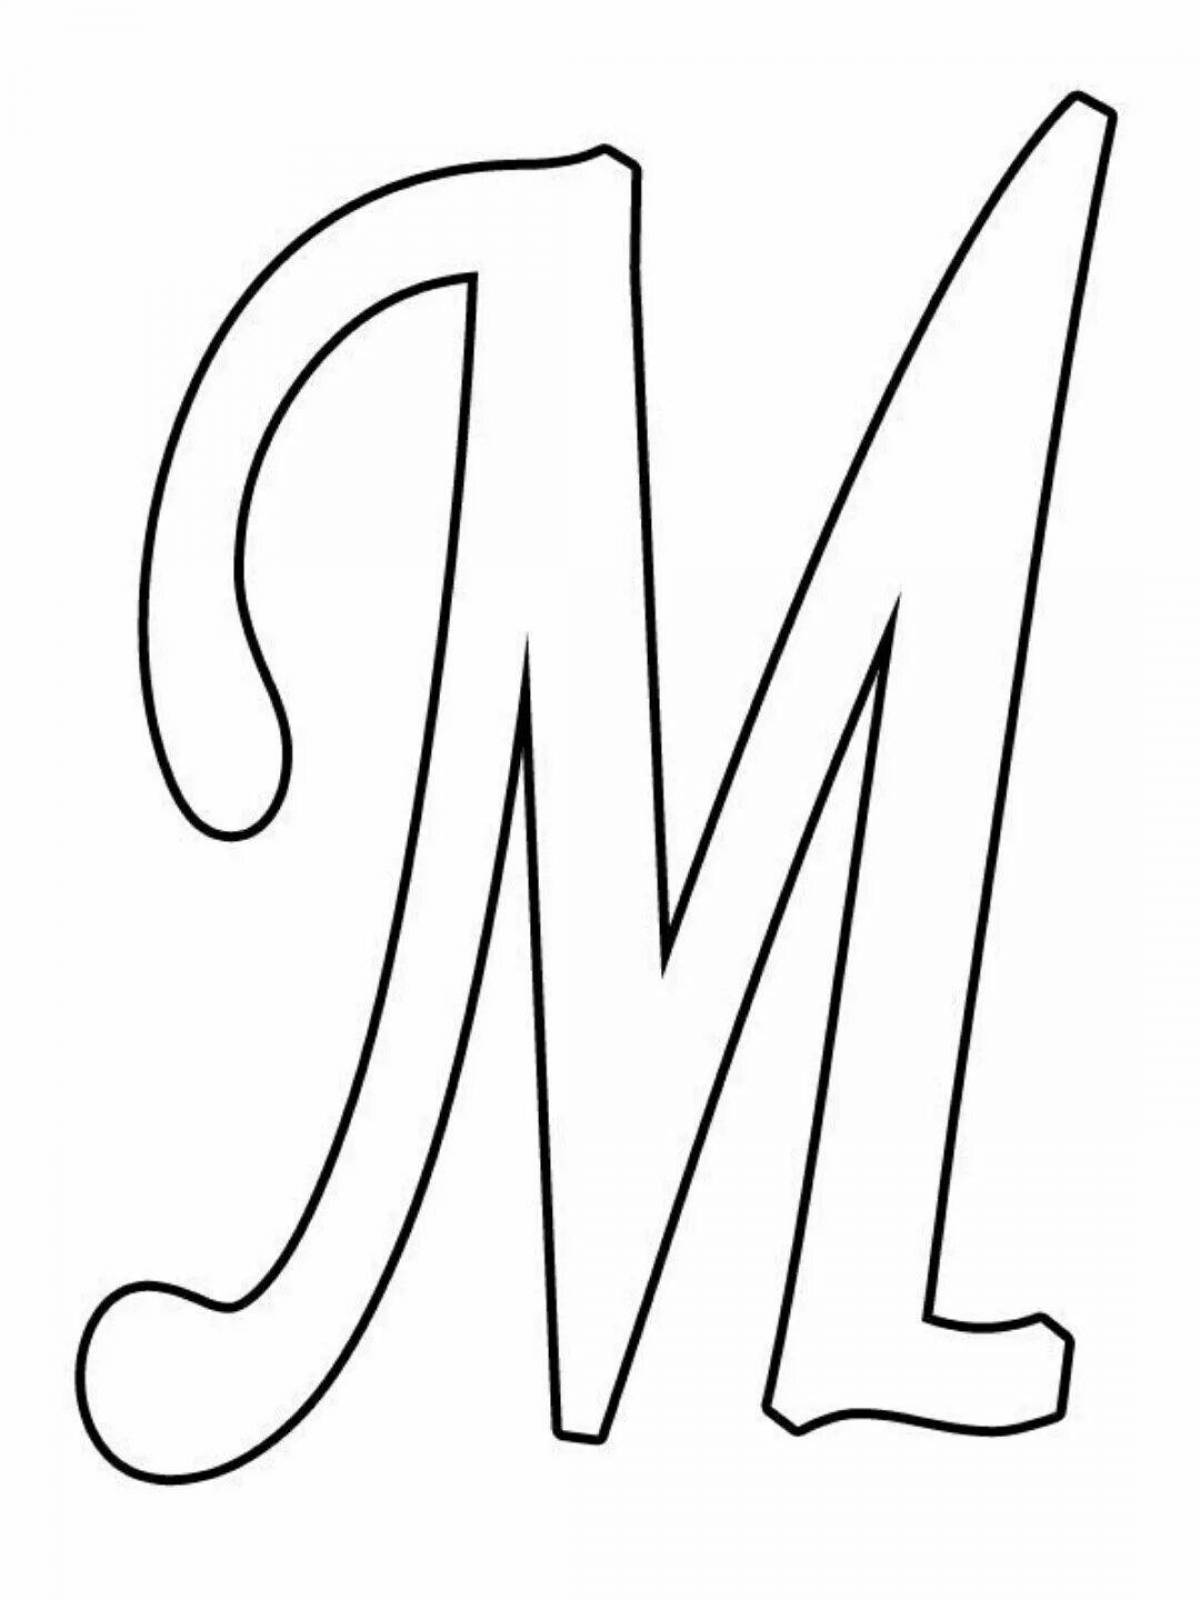 Charming letter coloring pages for decoration